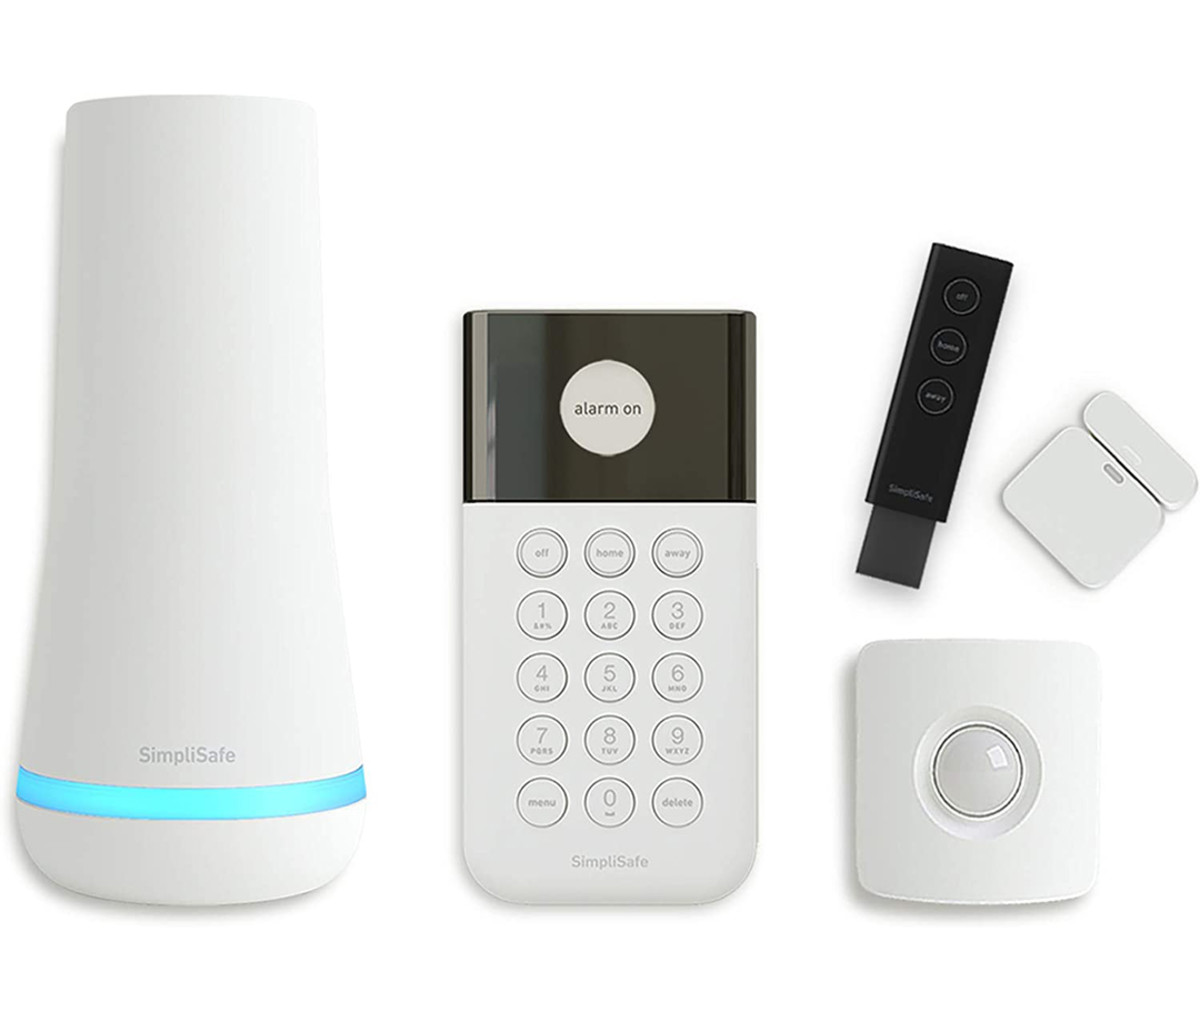 Dwelling House owners Have to Personal the SimpliSafe Dwelling Safety System